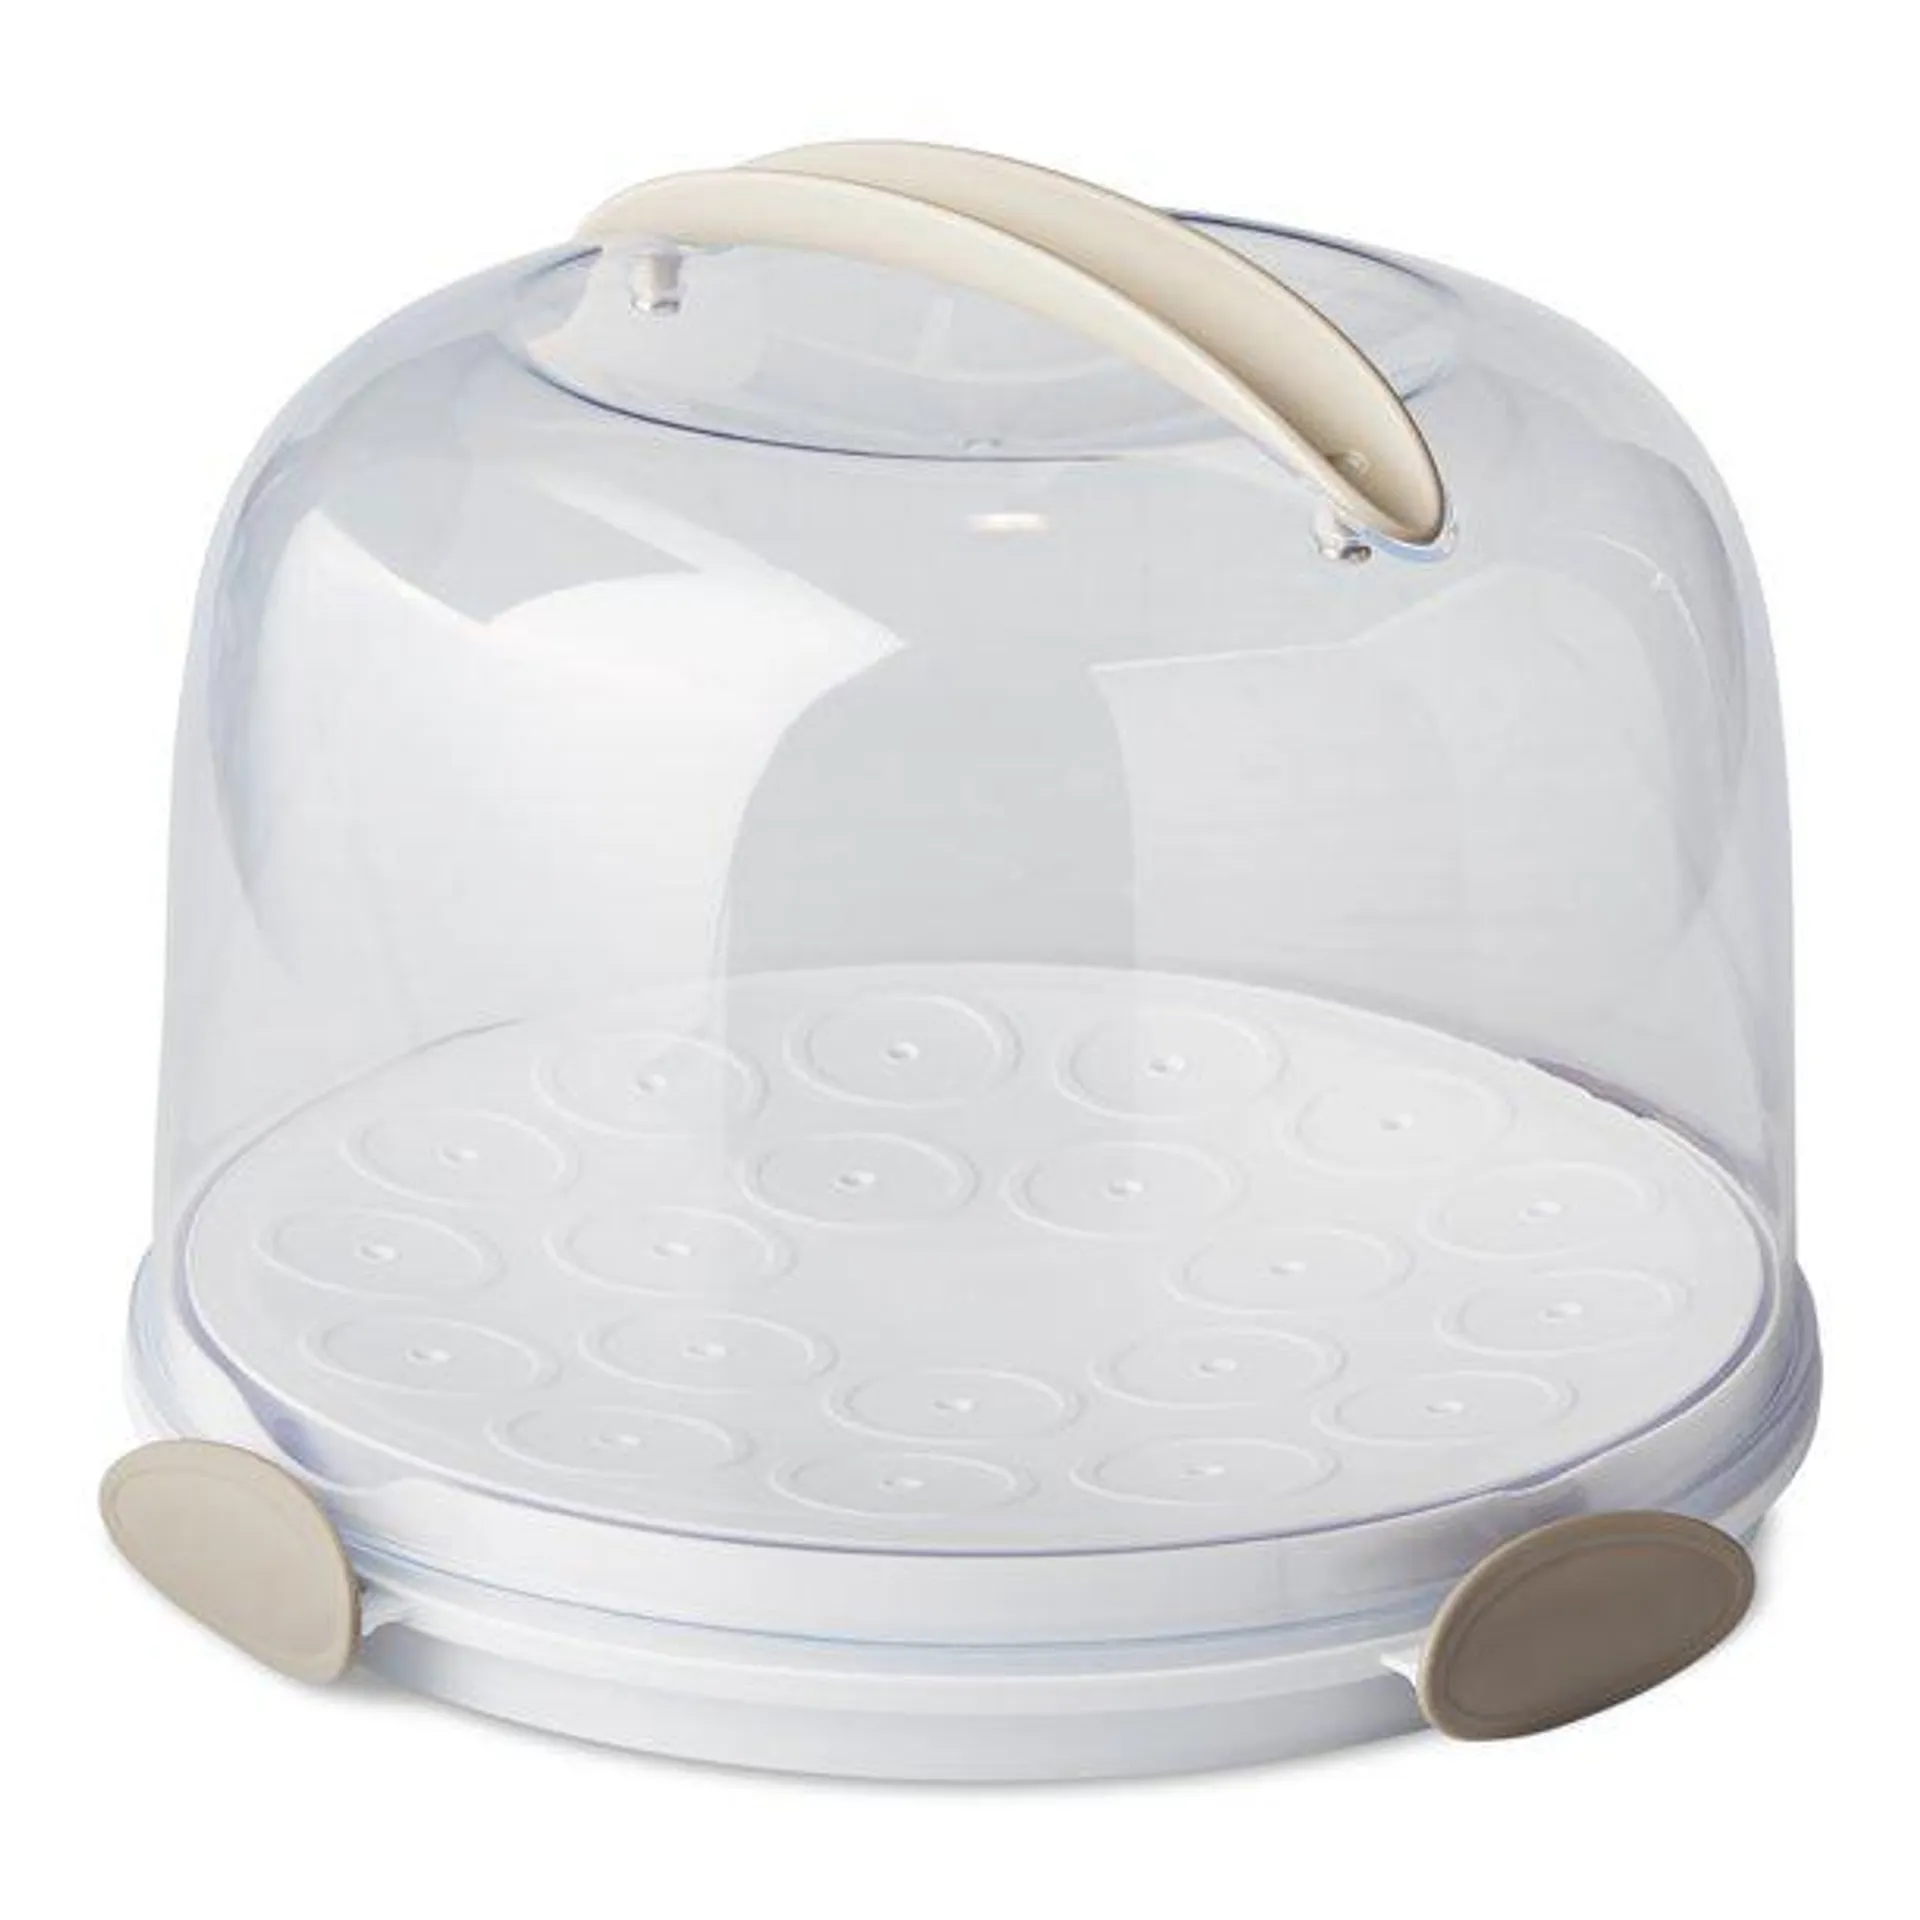 Better Homes & Gardens Round Cake Carrier with Clear Plastic Cover, 13" Diameter, Dishwasher Safe